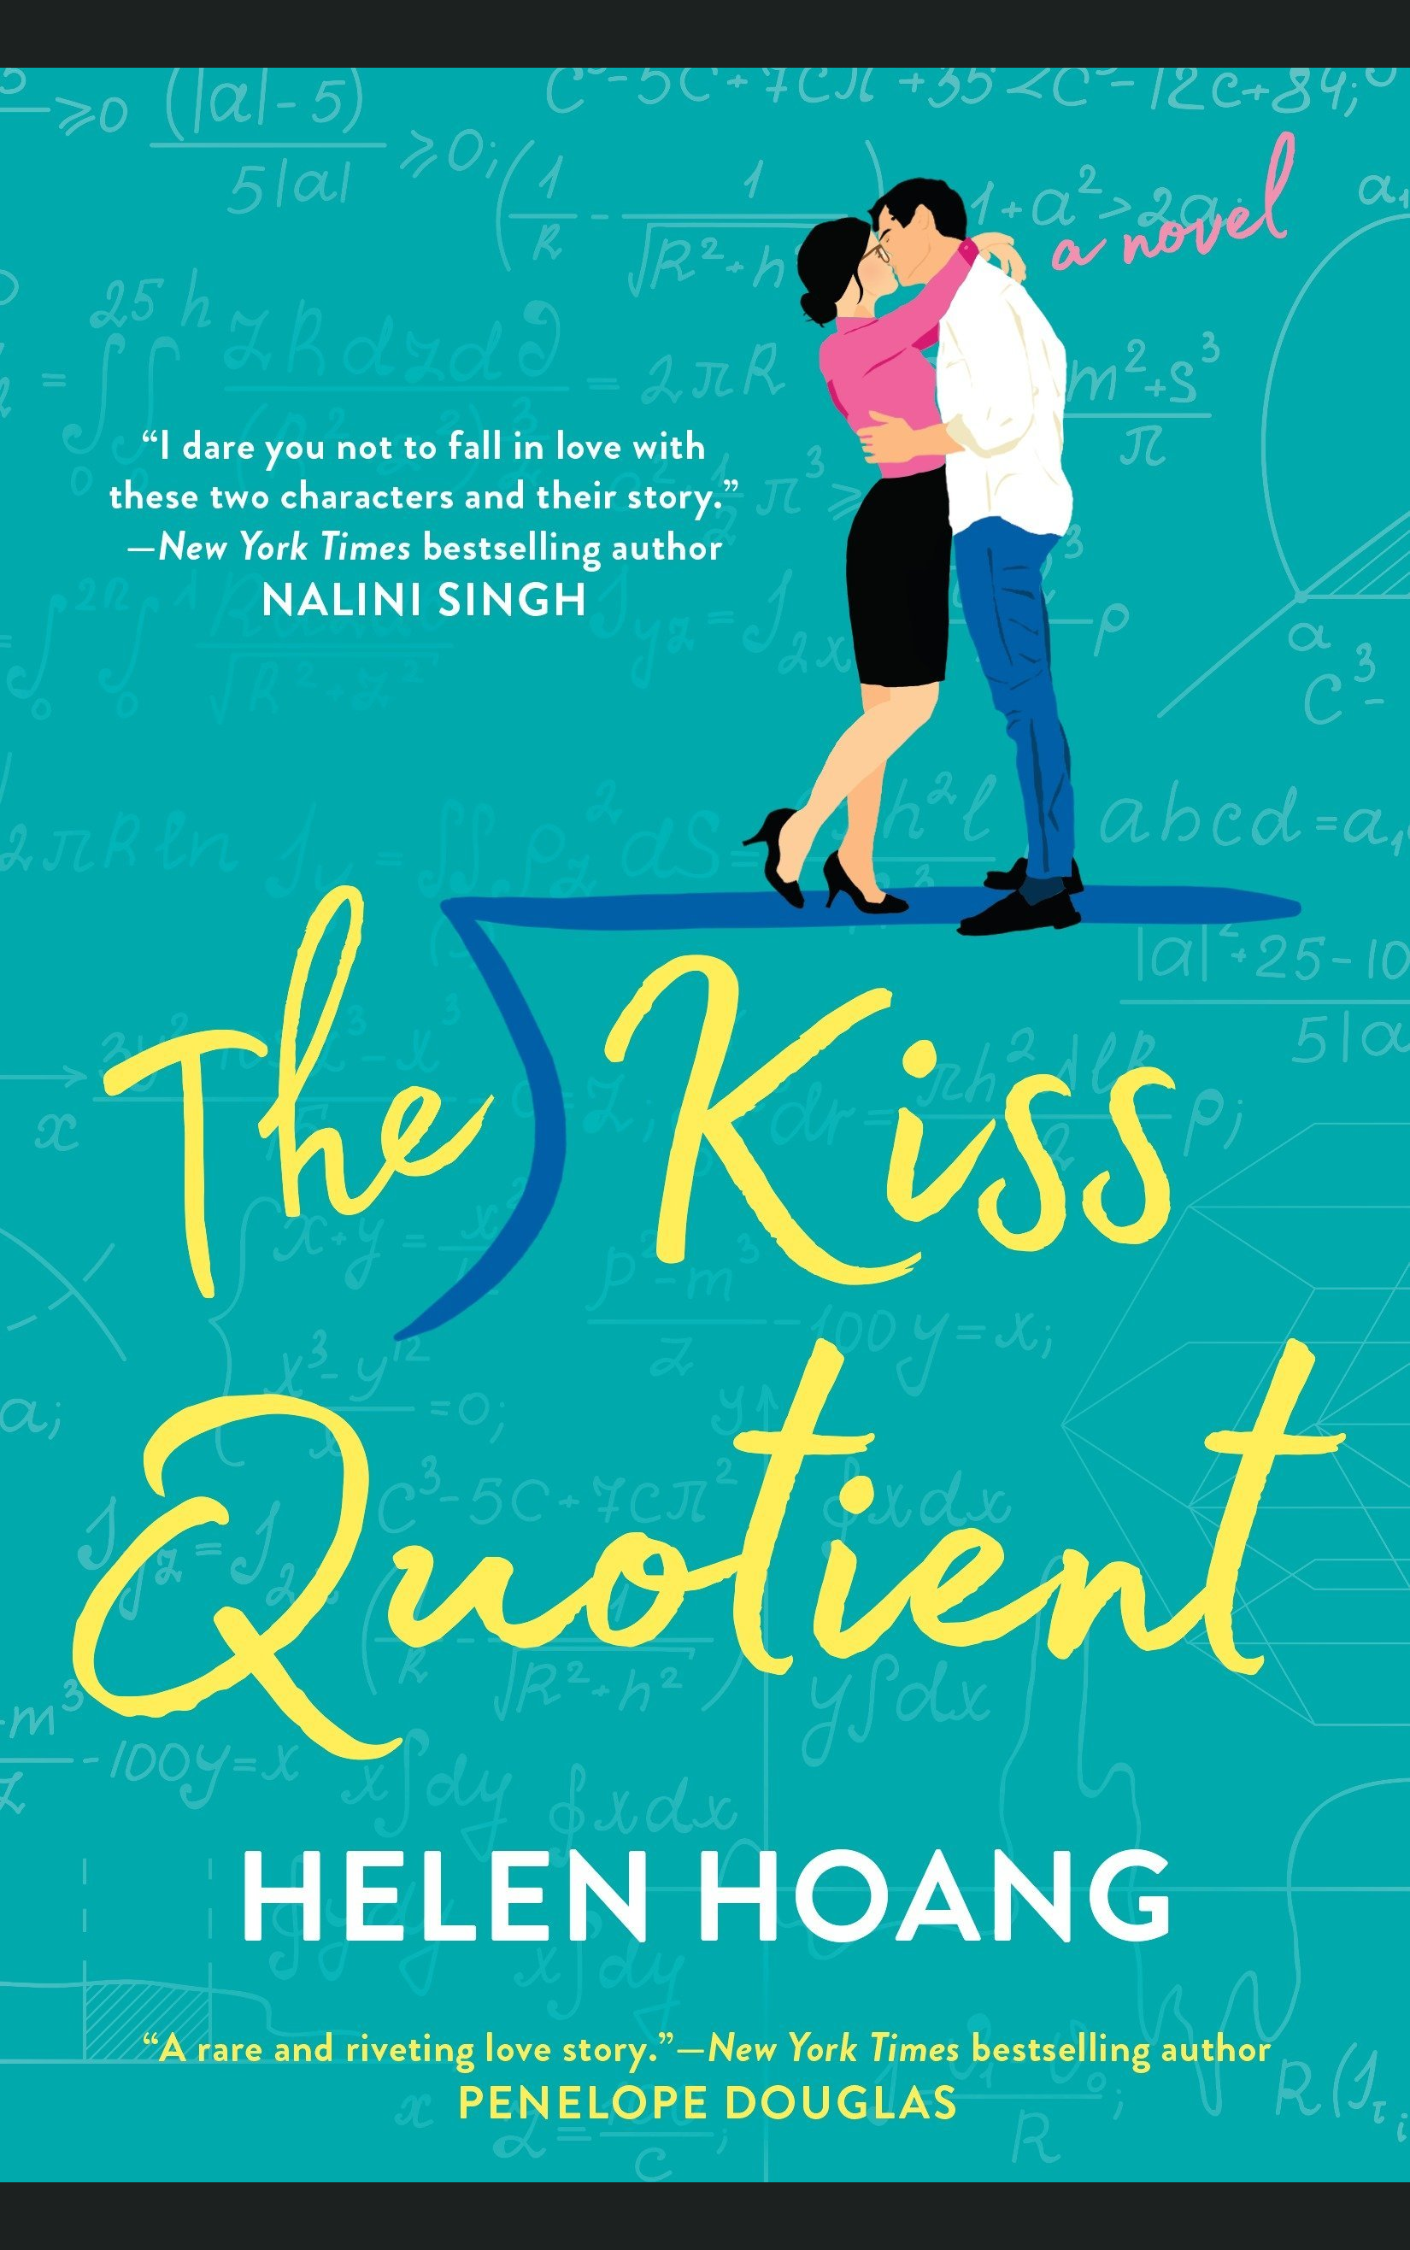 THE KISS QUOTIENT by HELEN HOANG